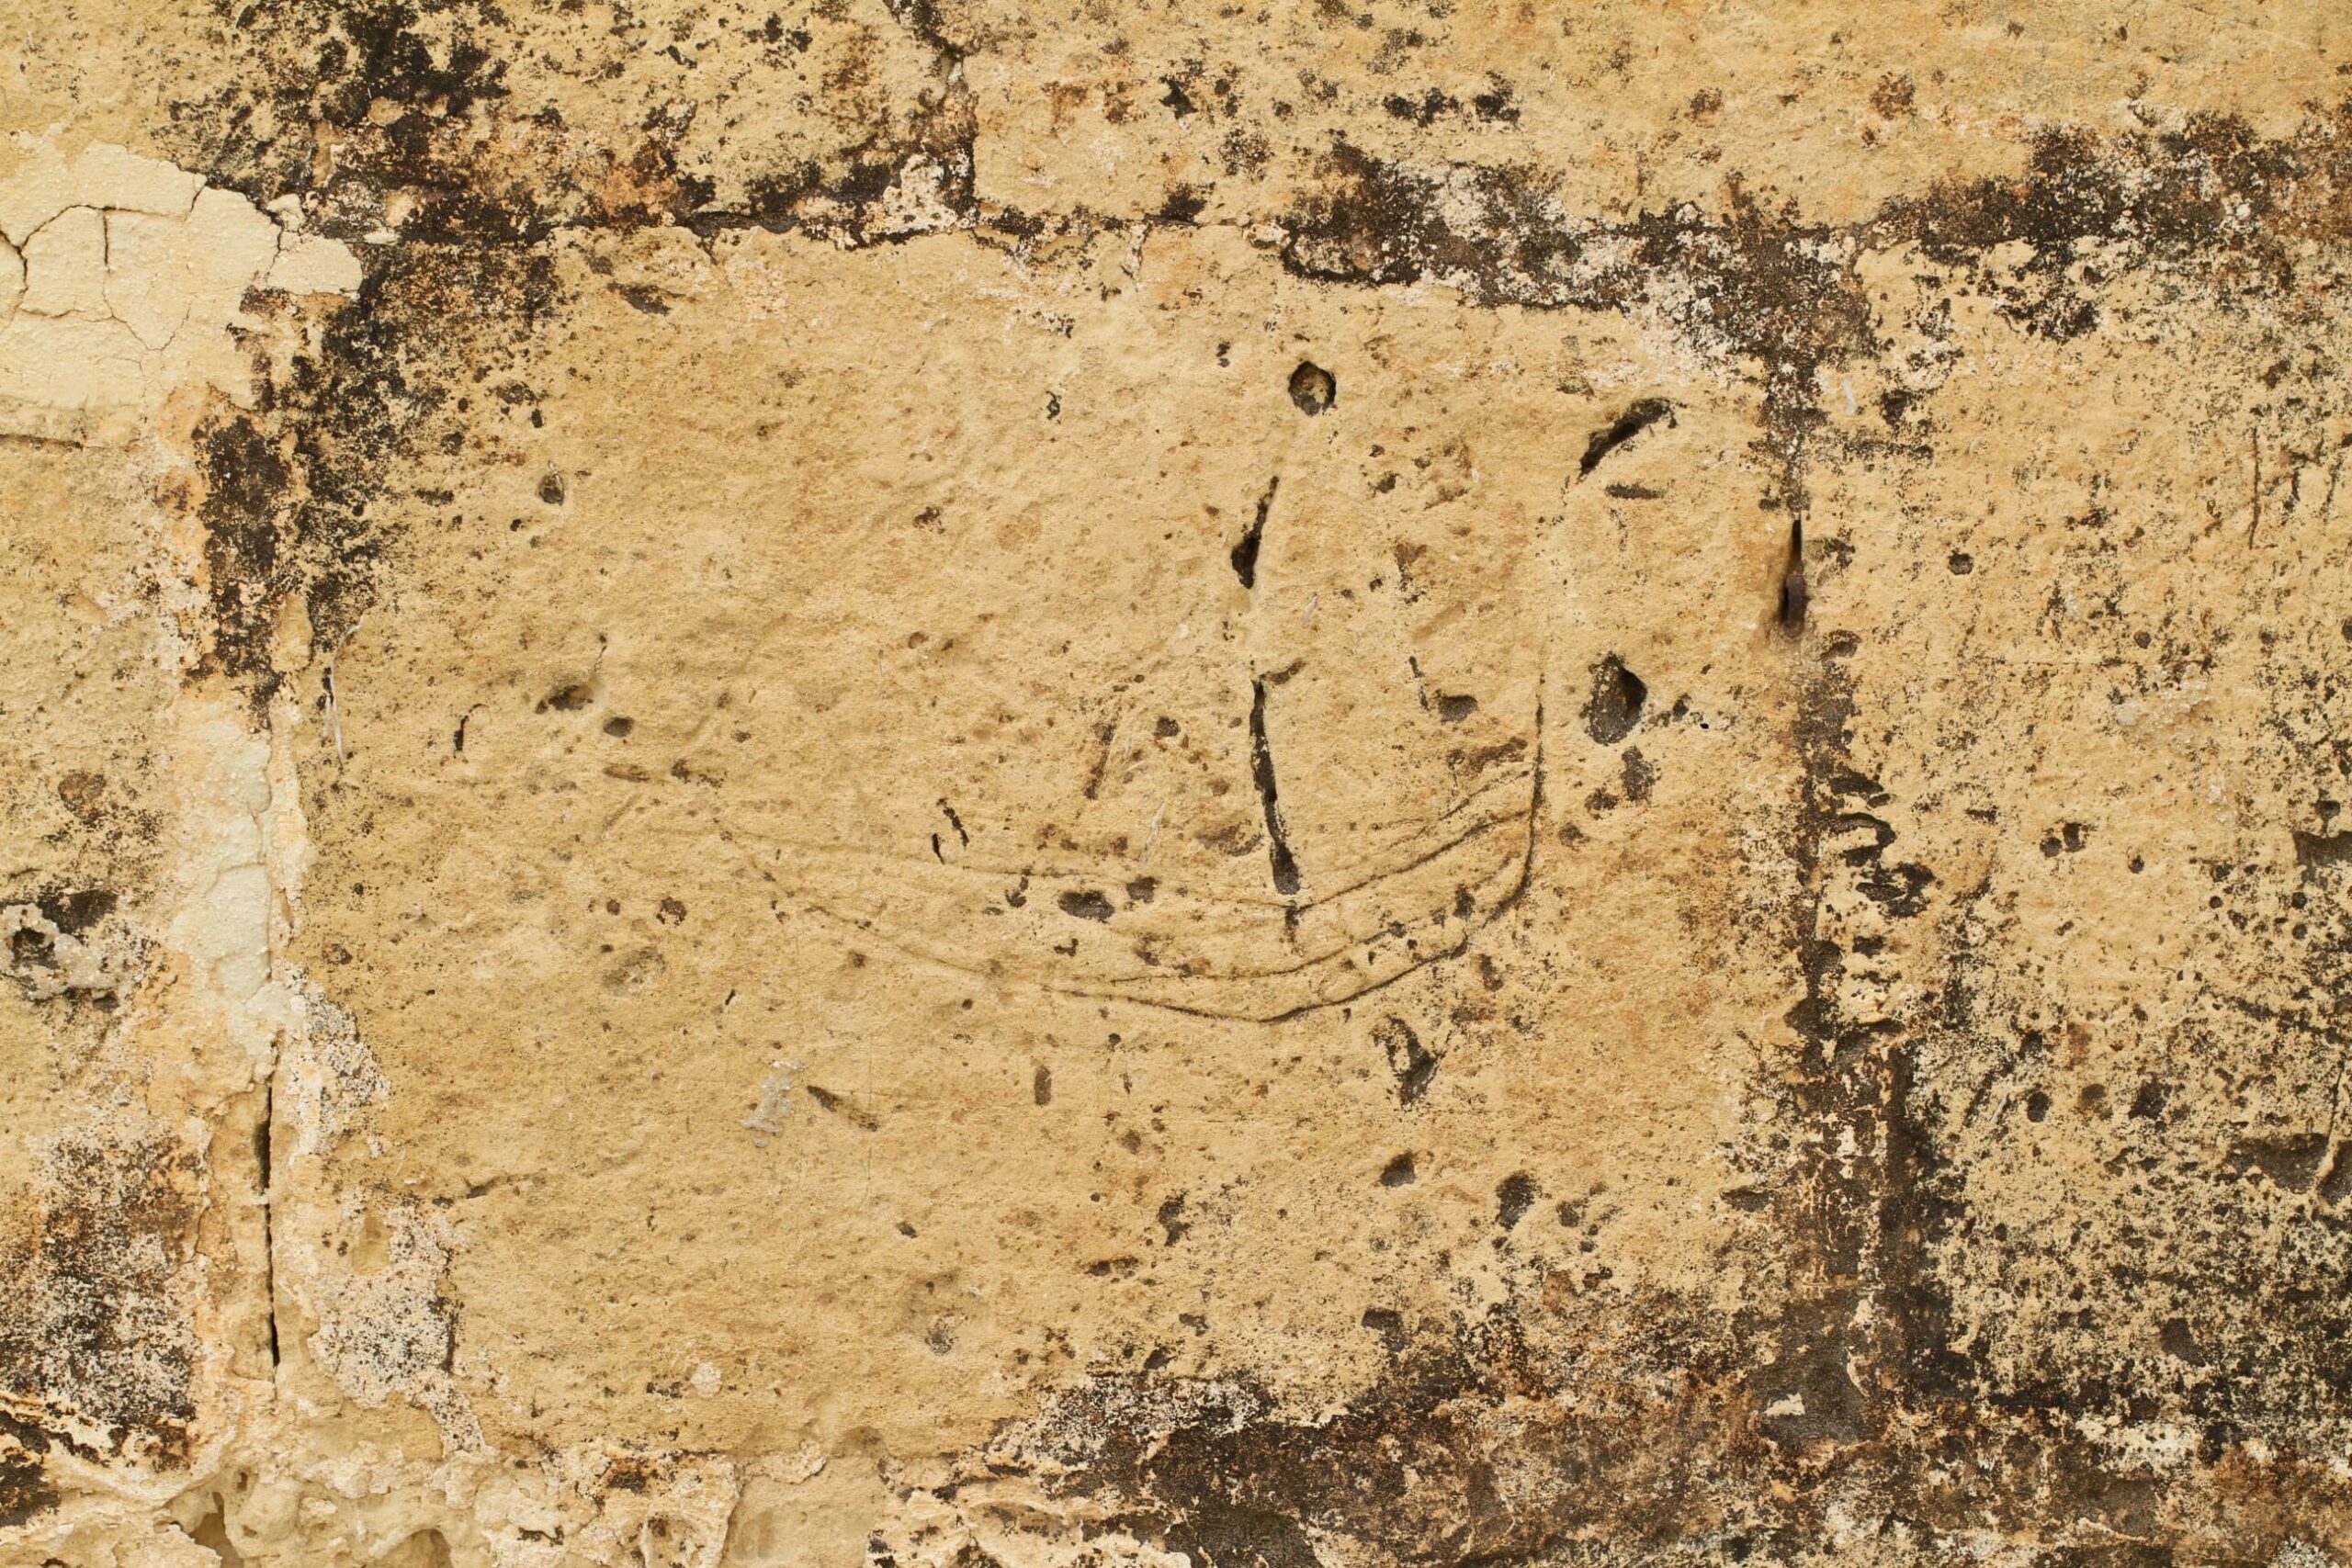 A simple ship graffito showing a hull and two lateen sails. The sails are fast disappearing from view.